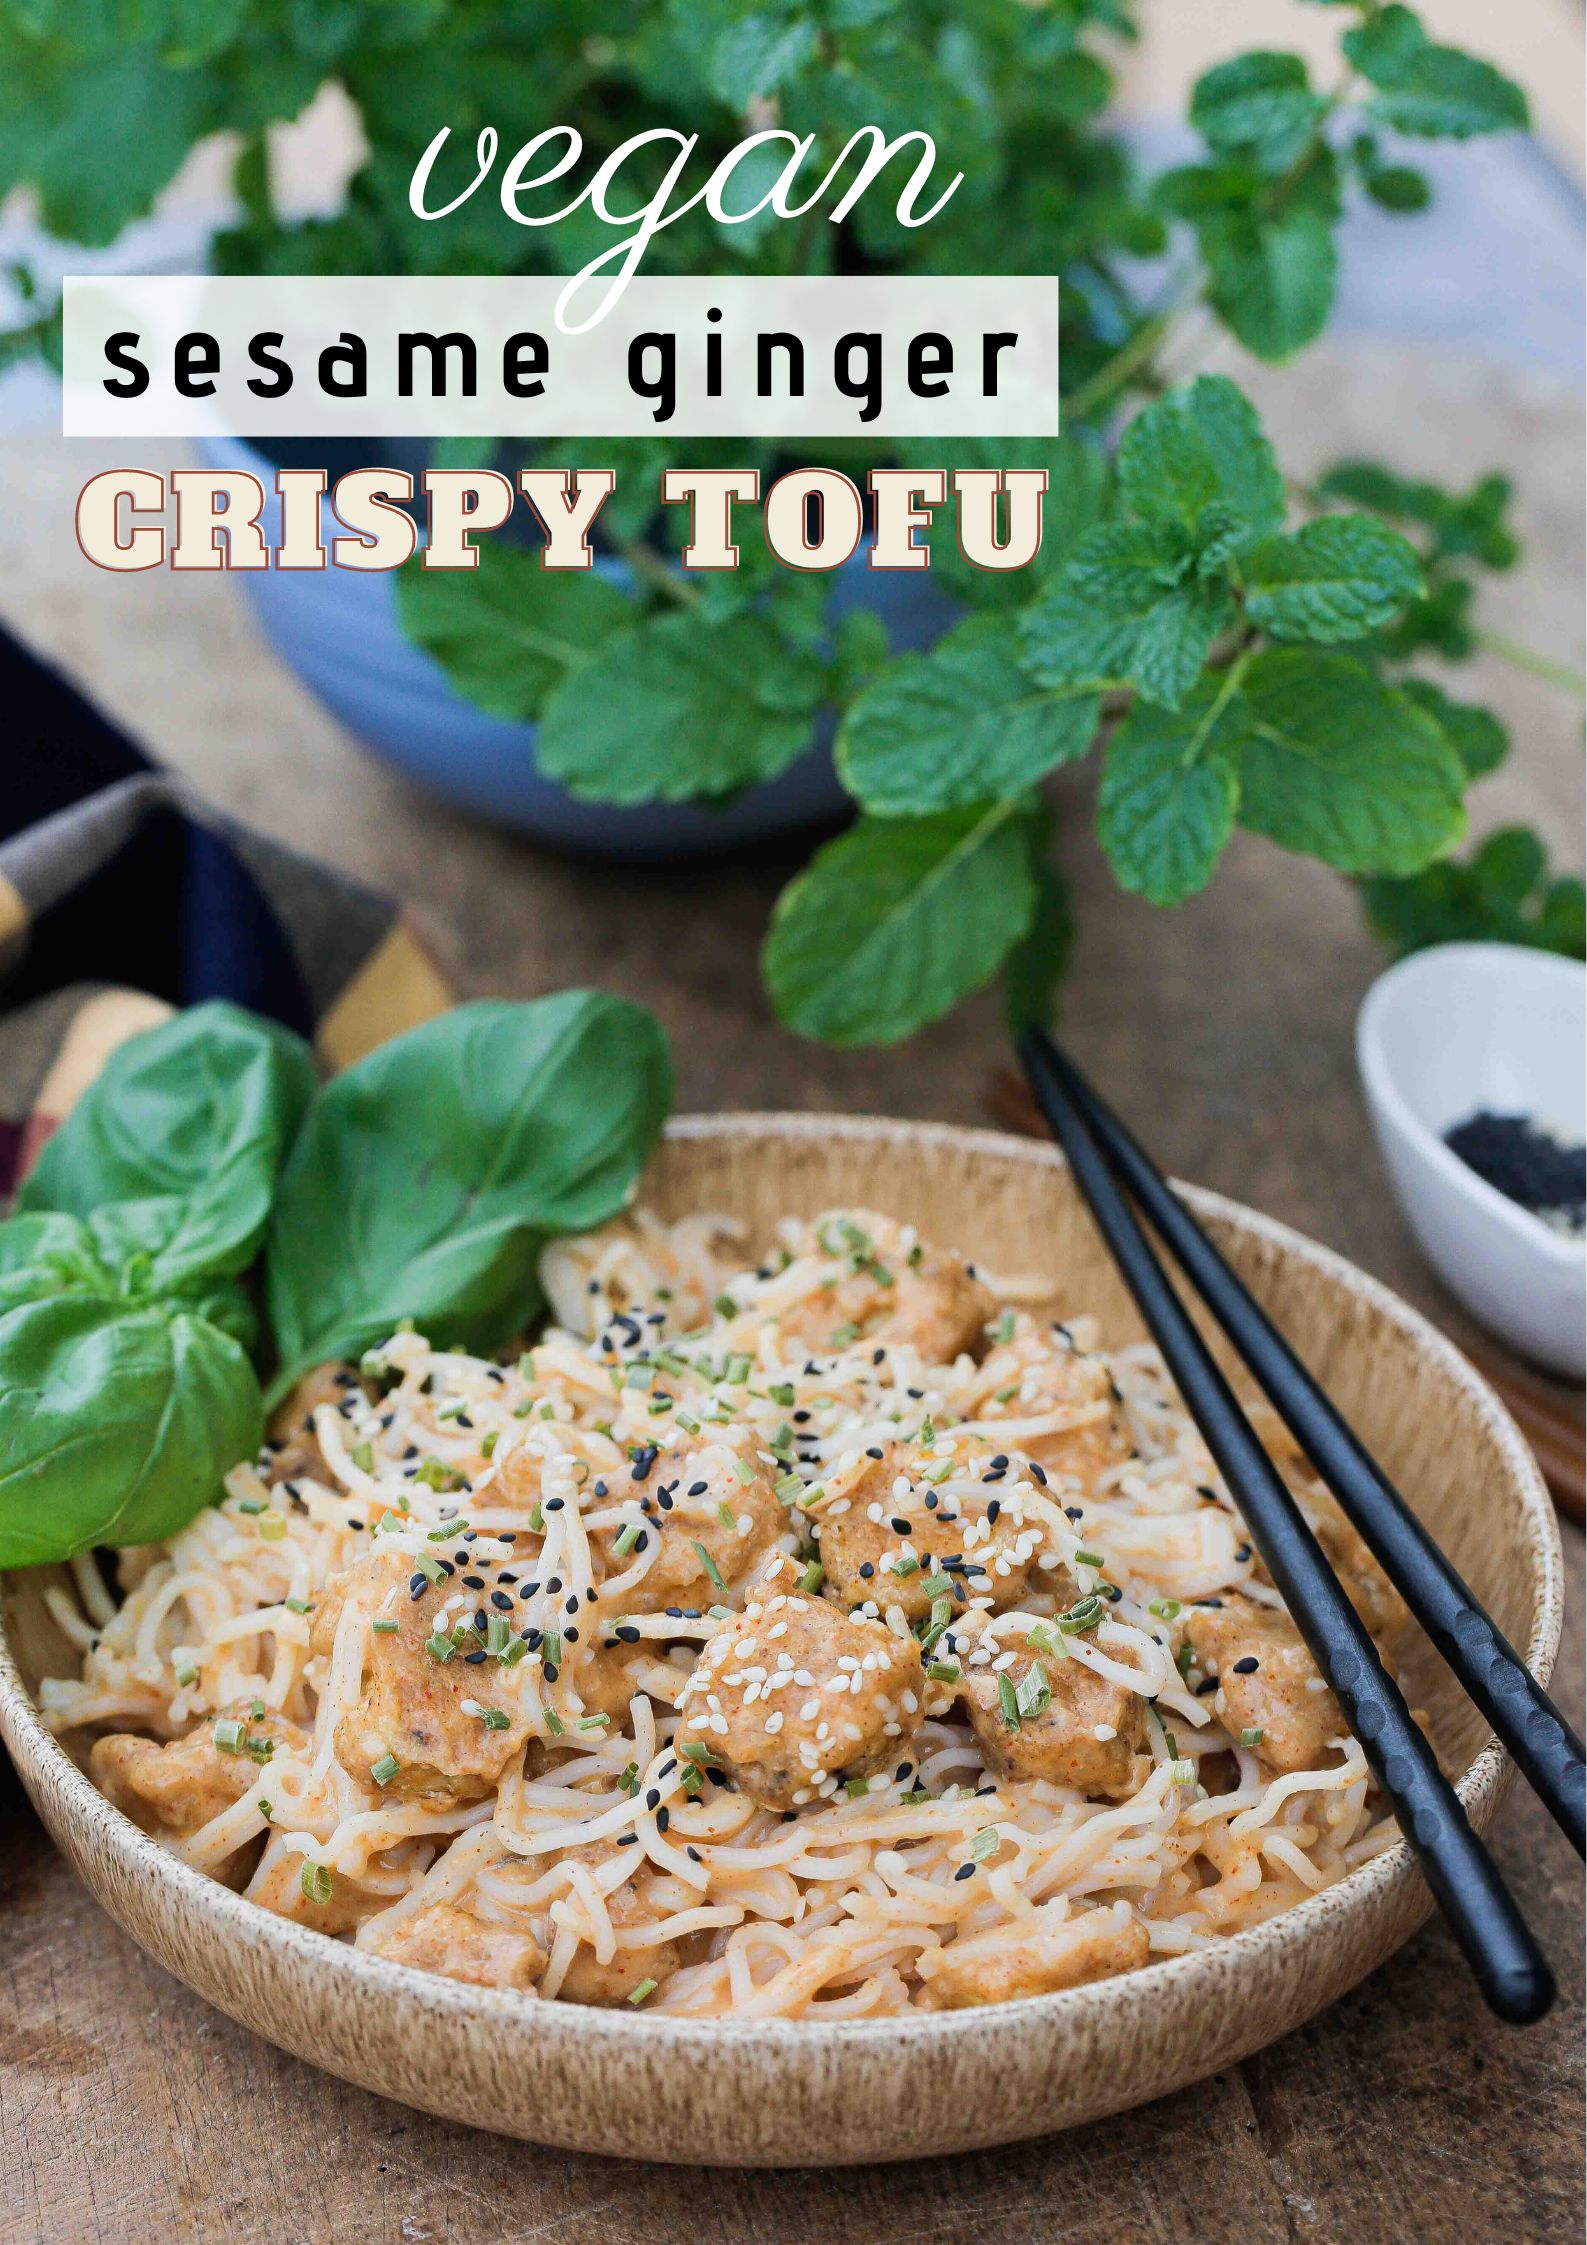 Fragrant and aromatic this sesame ginger crispy tofu is a deliciously easy Asian inspired meal packed with flavour and protein! Recipe on thecookandhim.com | #tofu #bakedtofu #crispytofu #tofurecipes #veganrecipes #veganmealideas